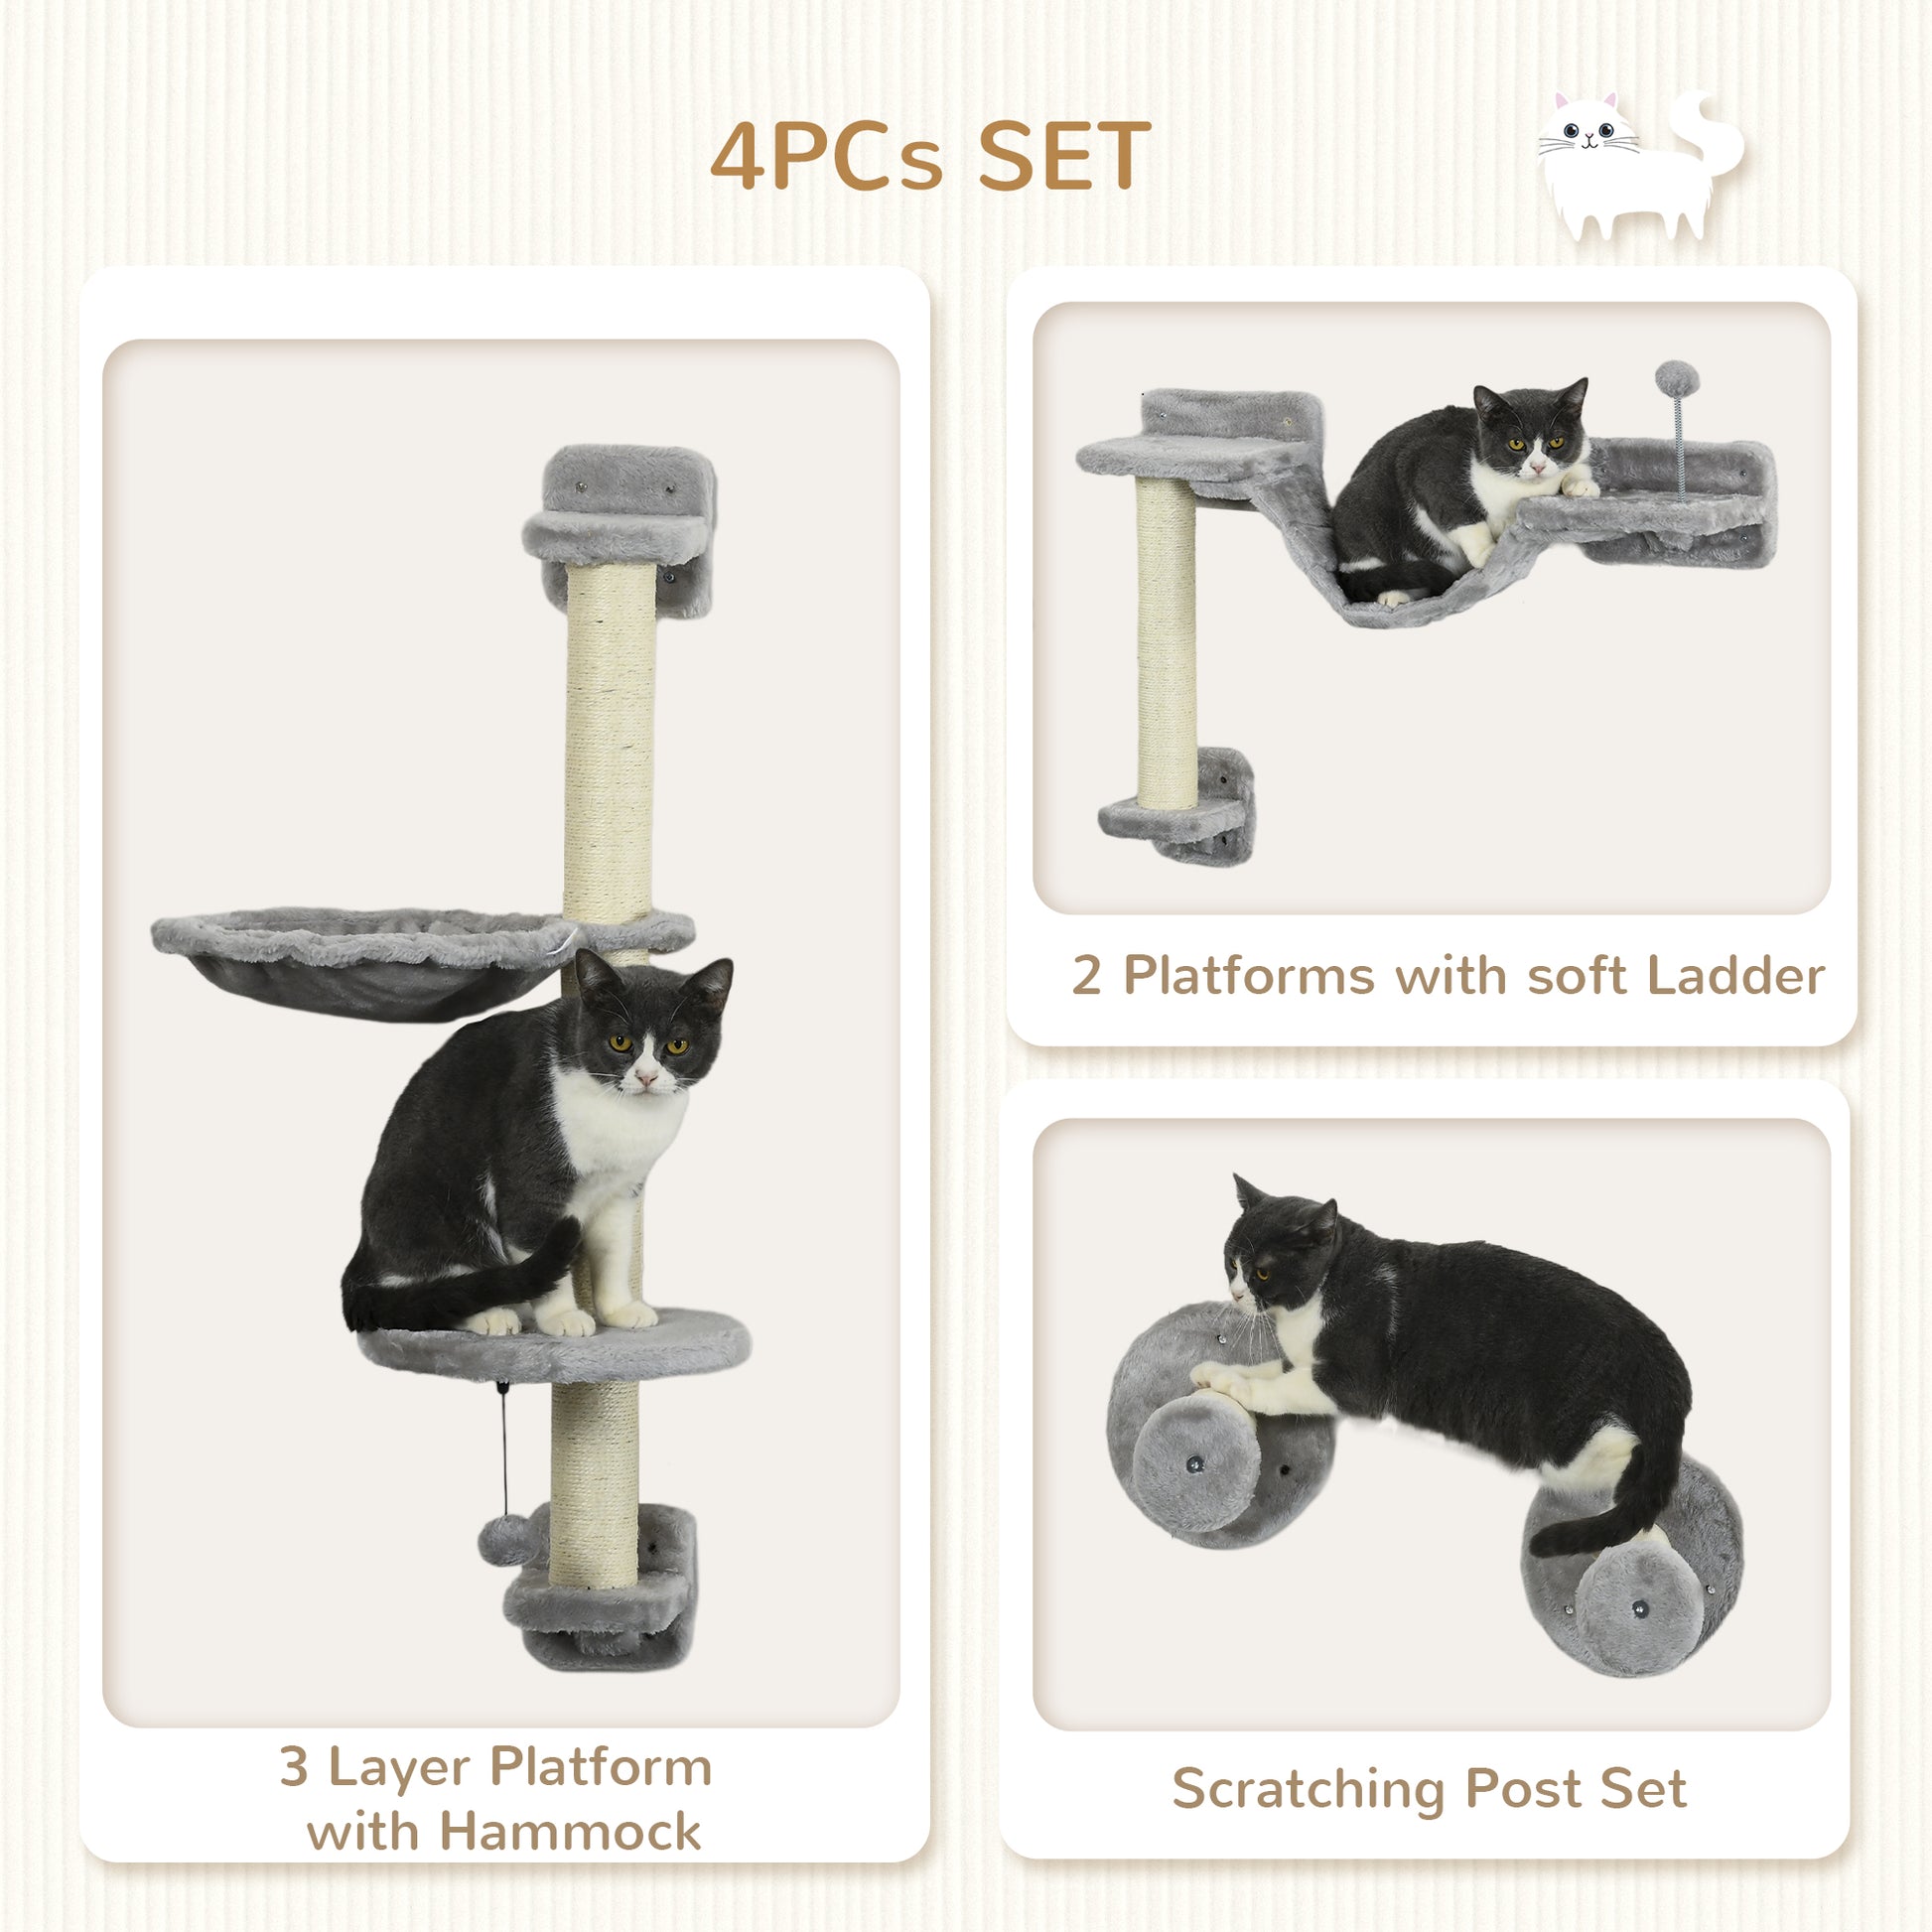 4PCs Cat Wall Shelves with Hammock, Scratching Post, Ladder, Steps, Platforms, Toy Balls, Grey - Gallery Canada